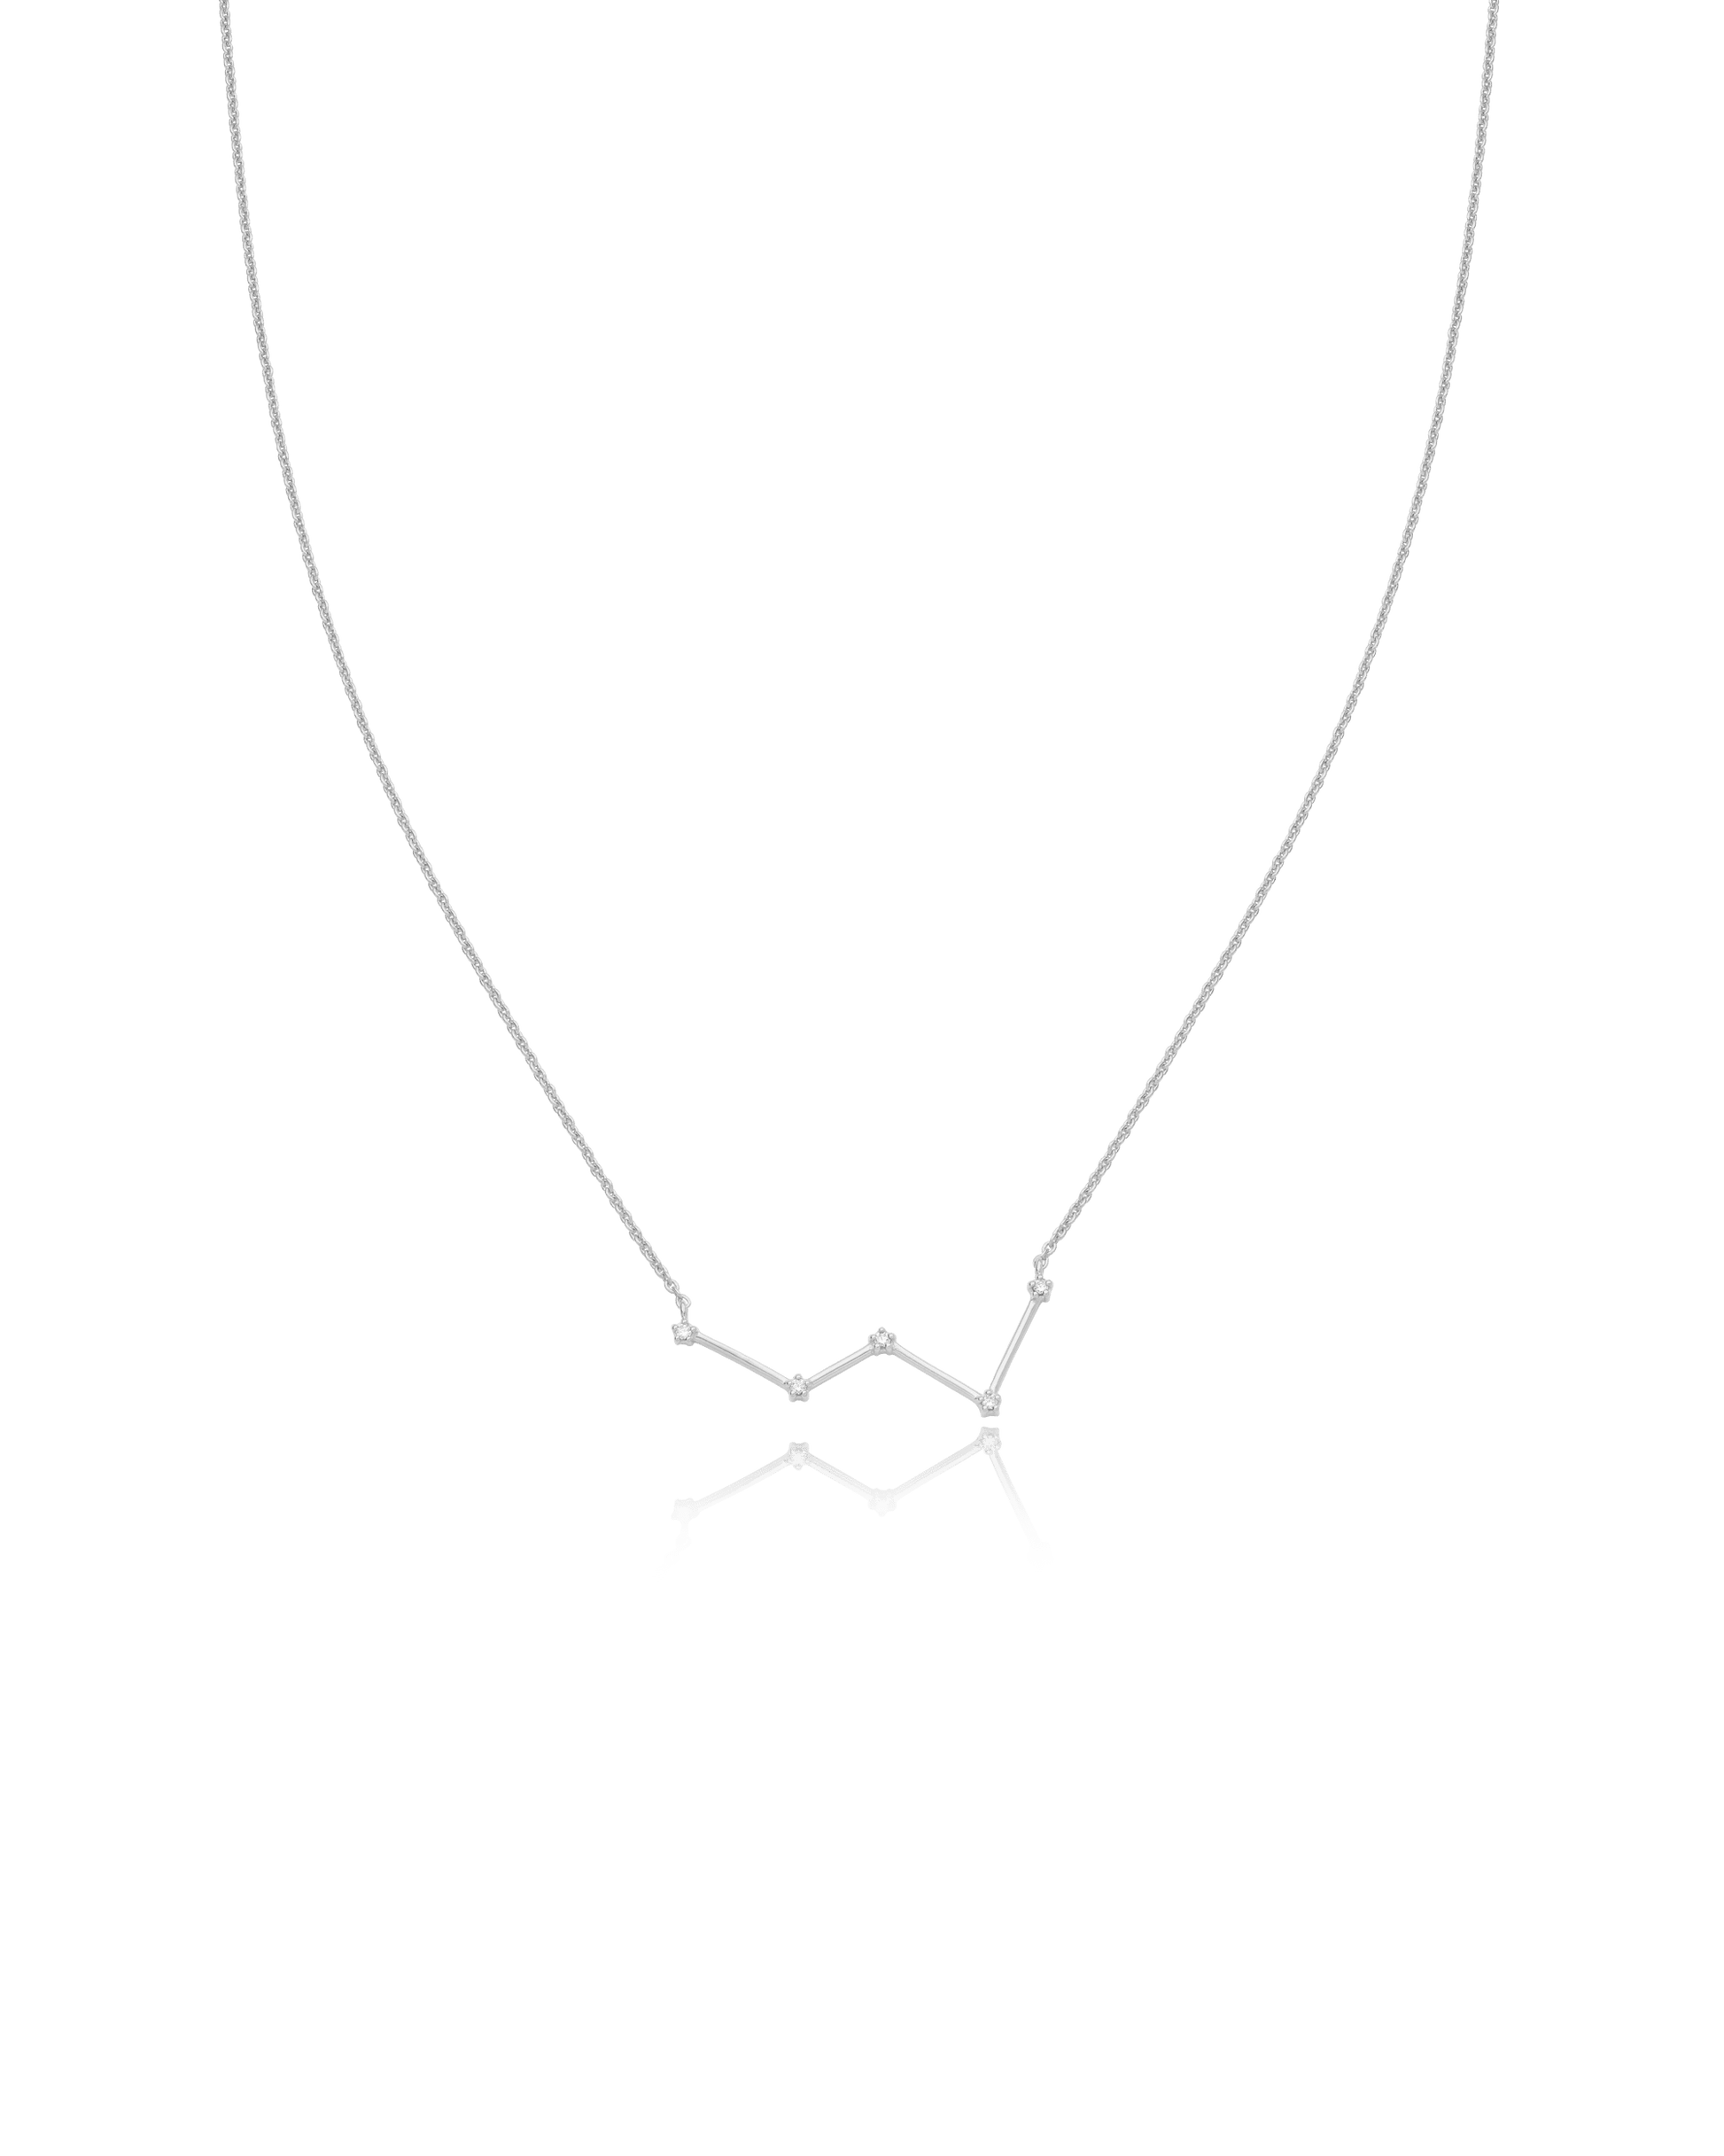 Ursa Major Constellation Necklace - 925 Sterling Silver Necklaces magal-dev Cassiopeia 16" 